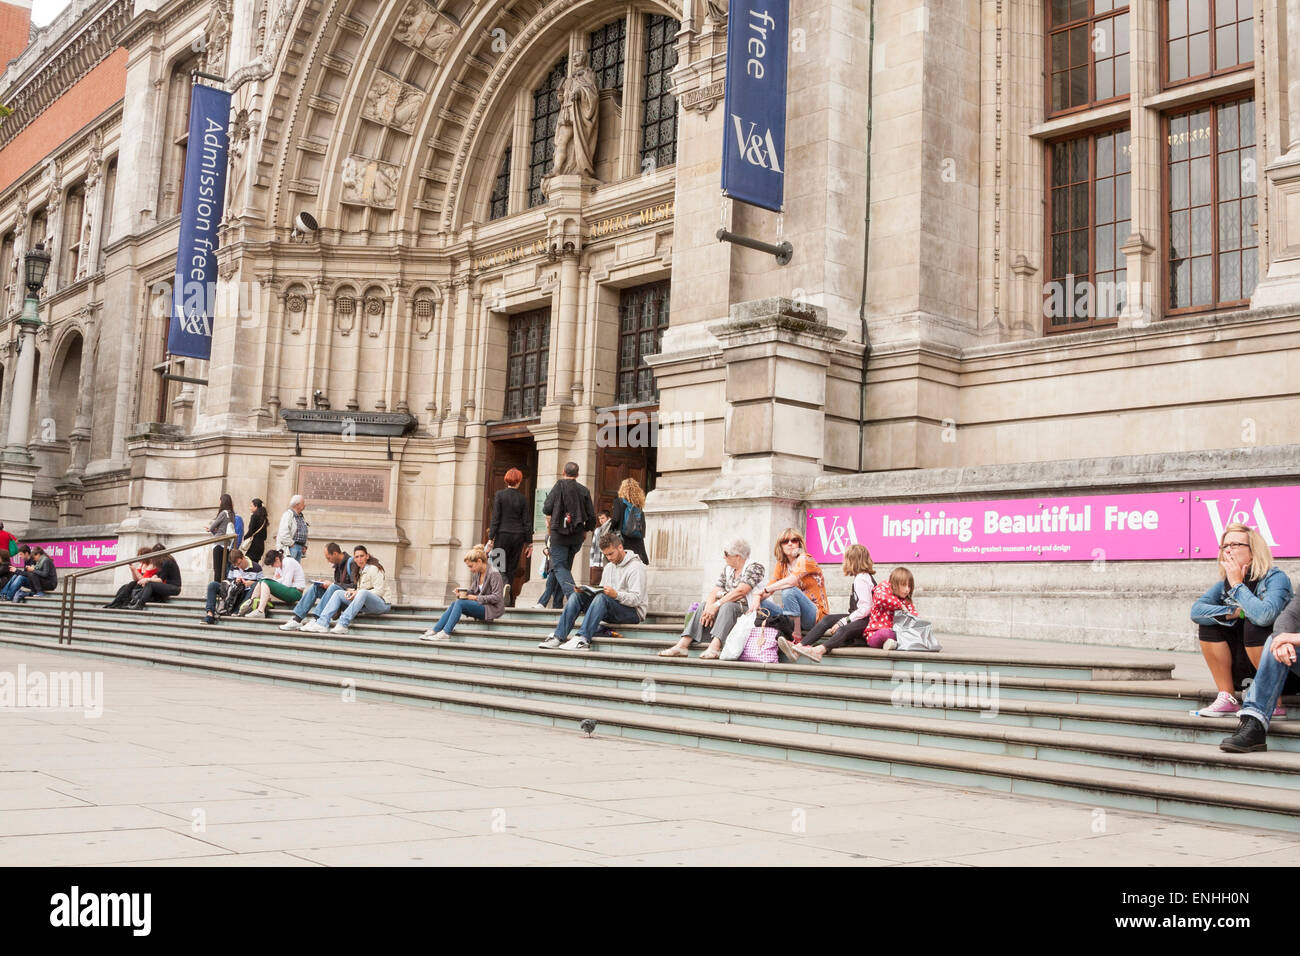 Outside view of the Victoria and Albert Museum entrance, London, UK. Stock Photo